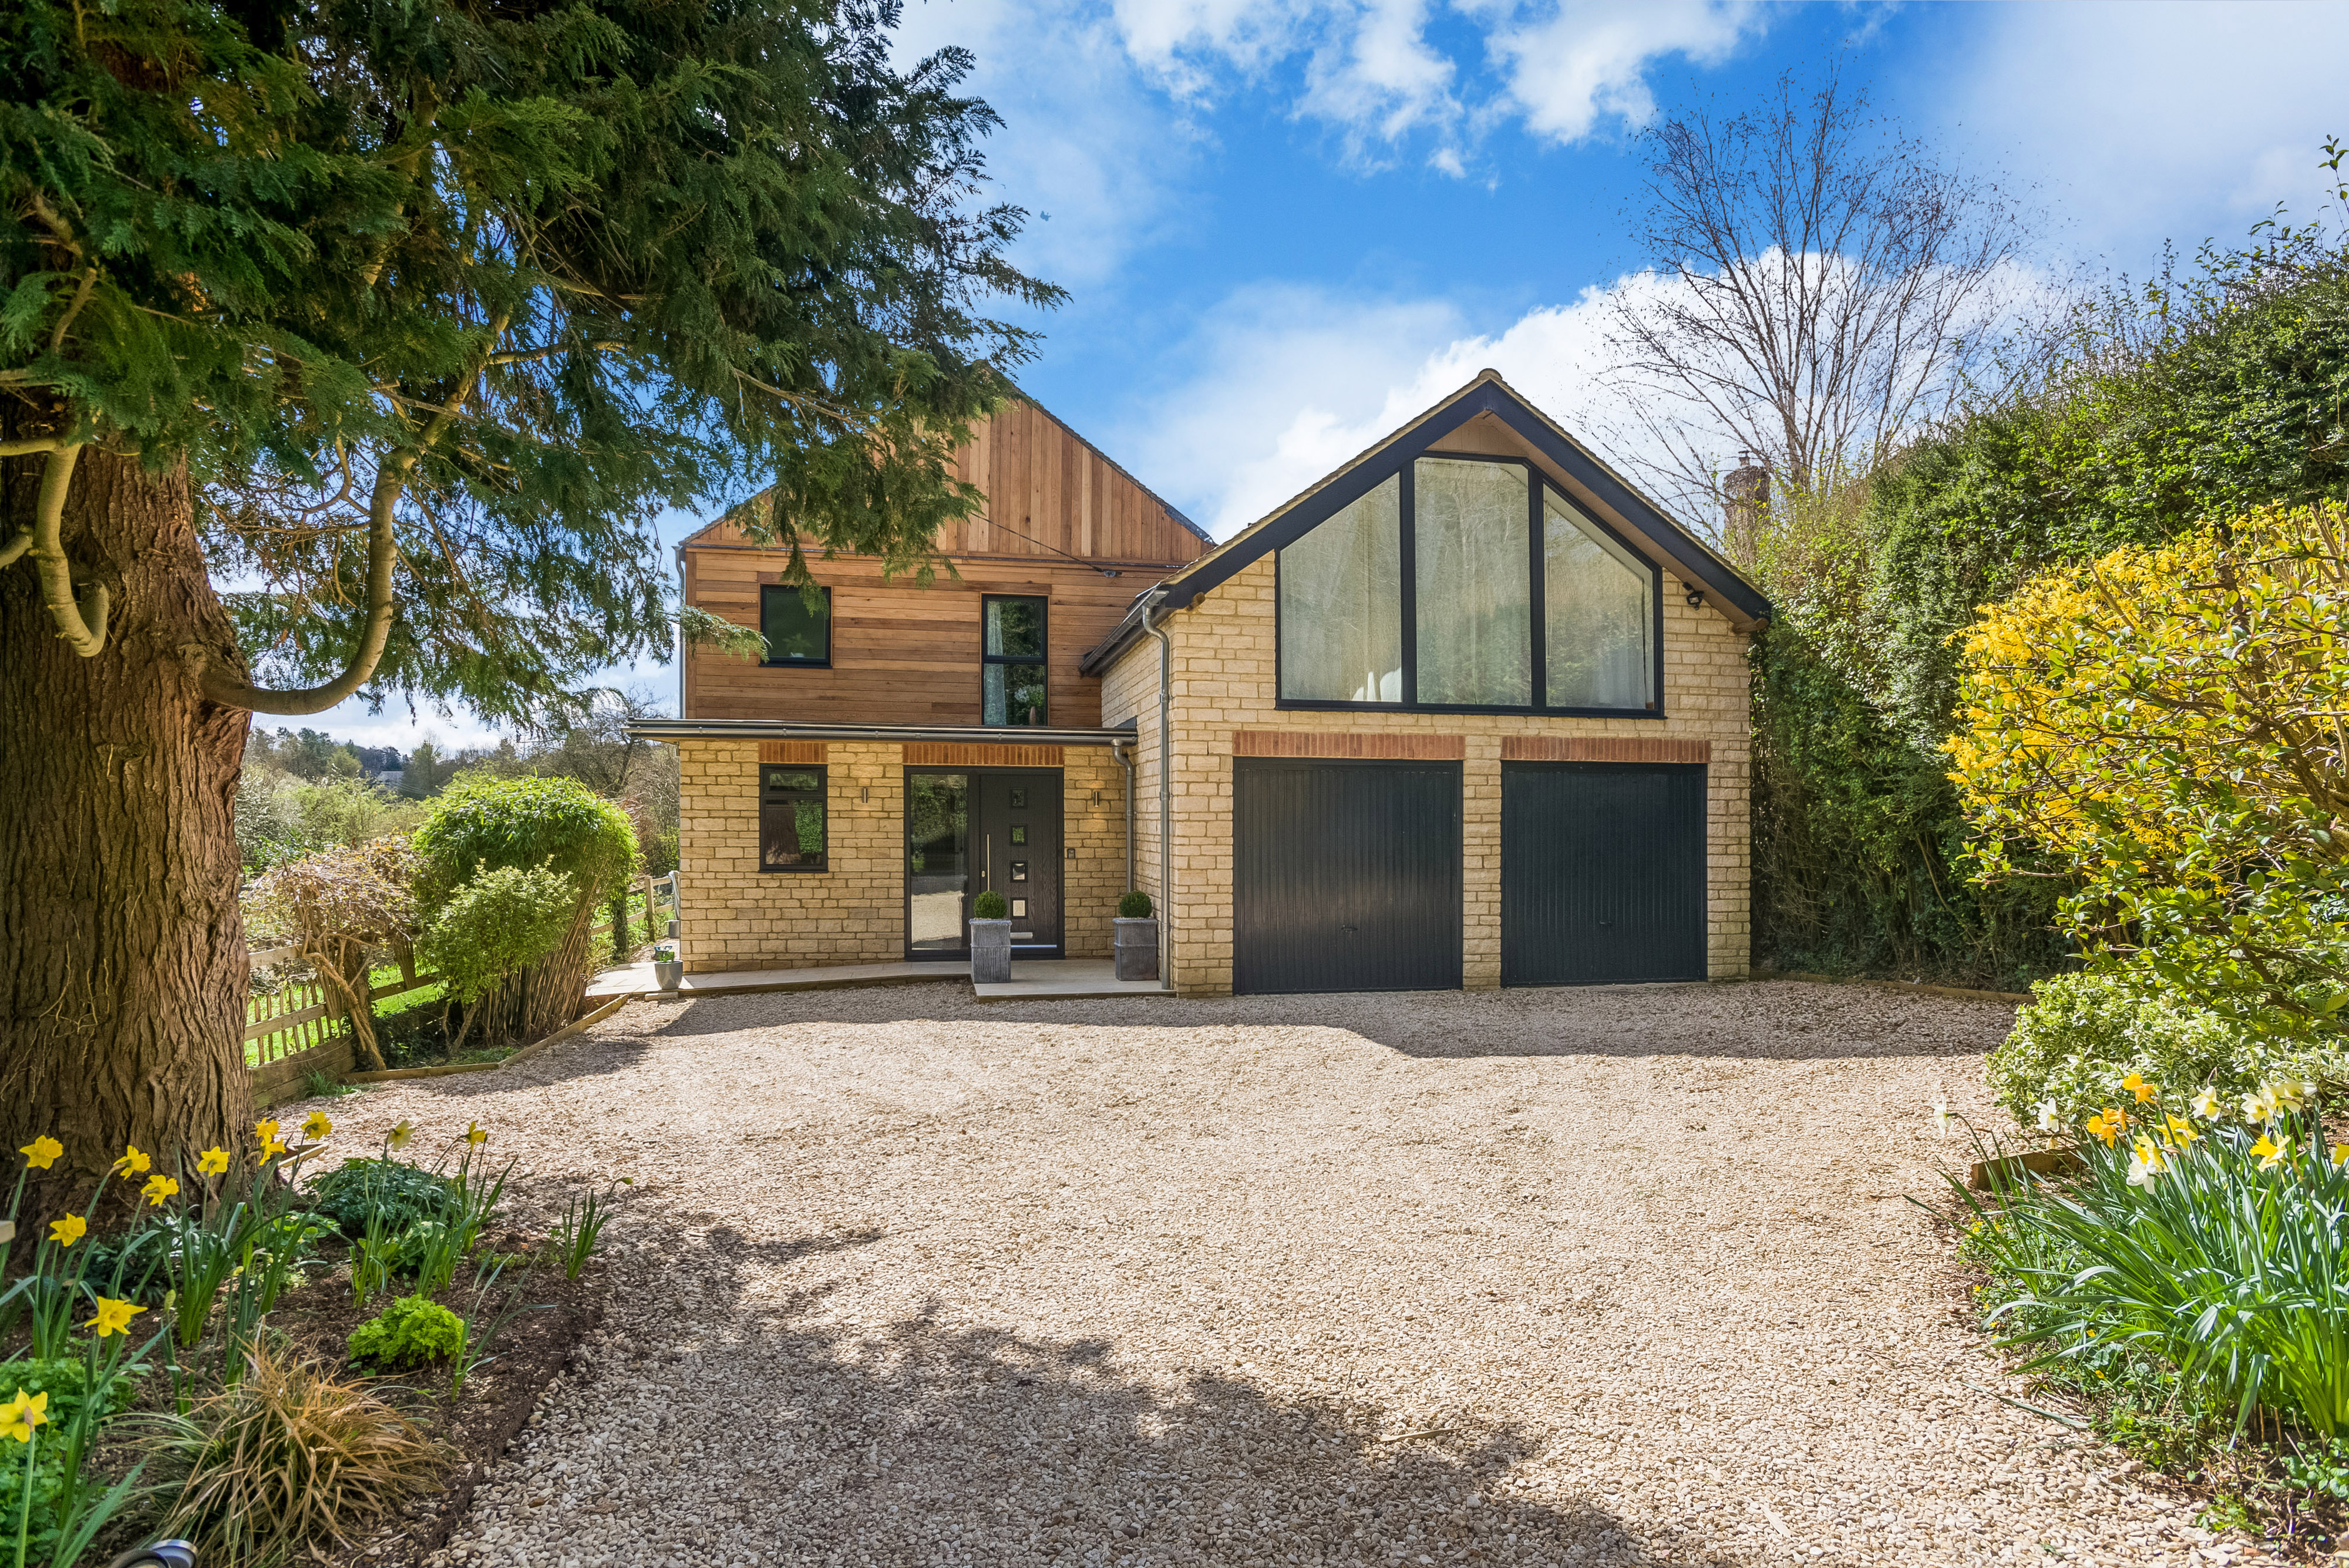 6 bed  for sale in Bicester Road, Chipping Norton  - Property Image 1